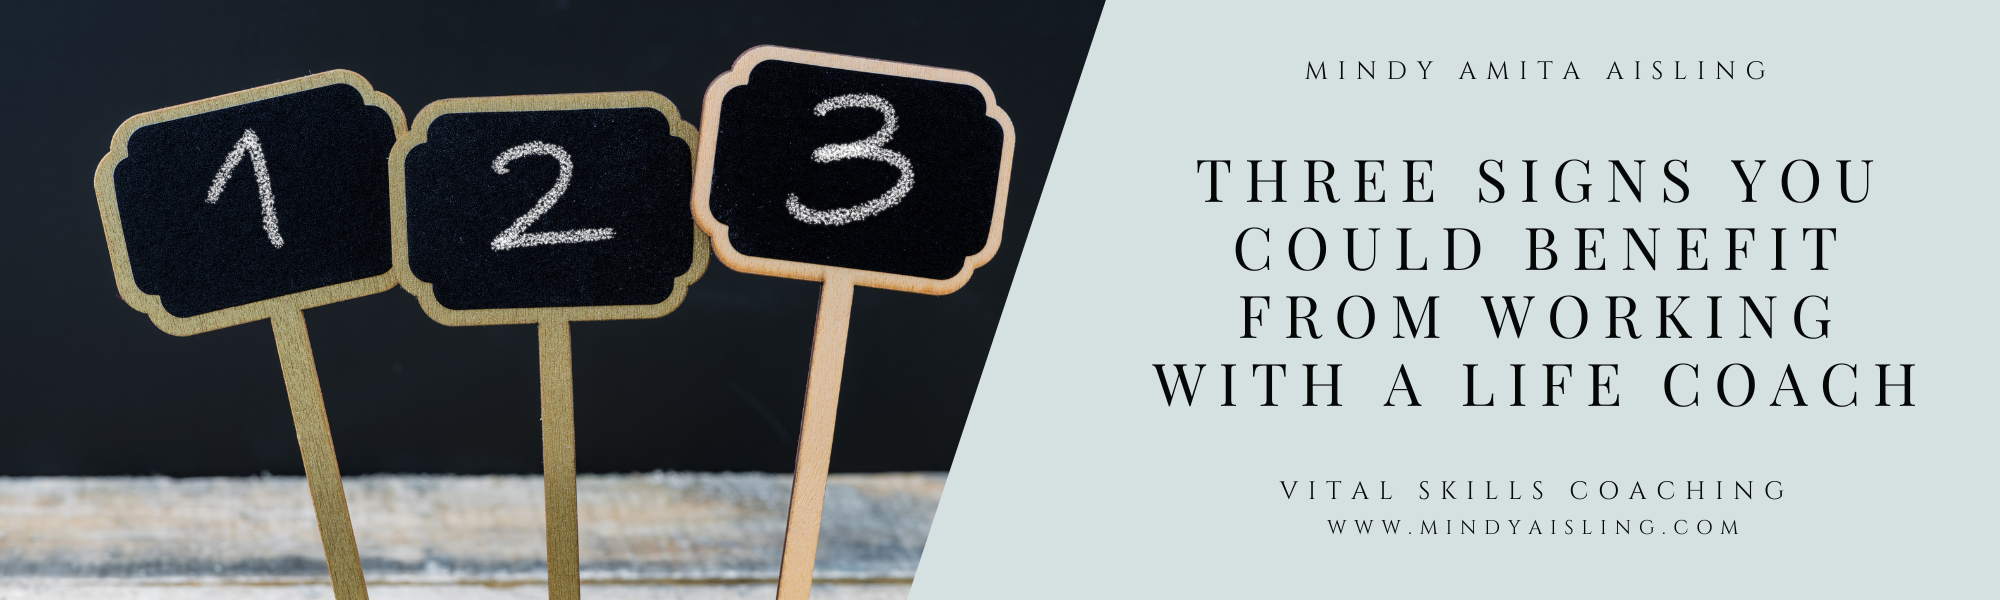 Three Signs You Could Benefit From Working with a Life Coach